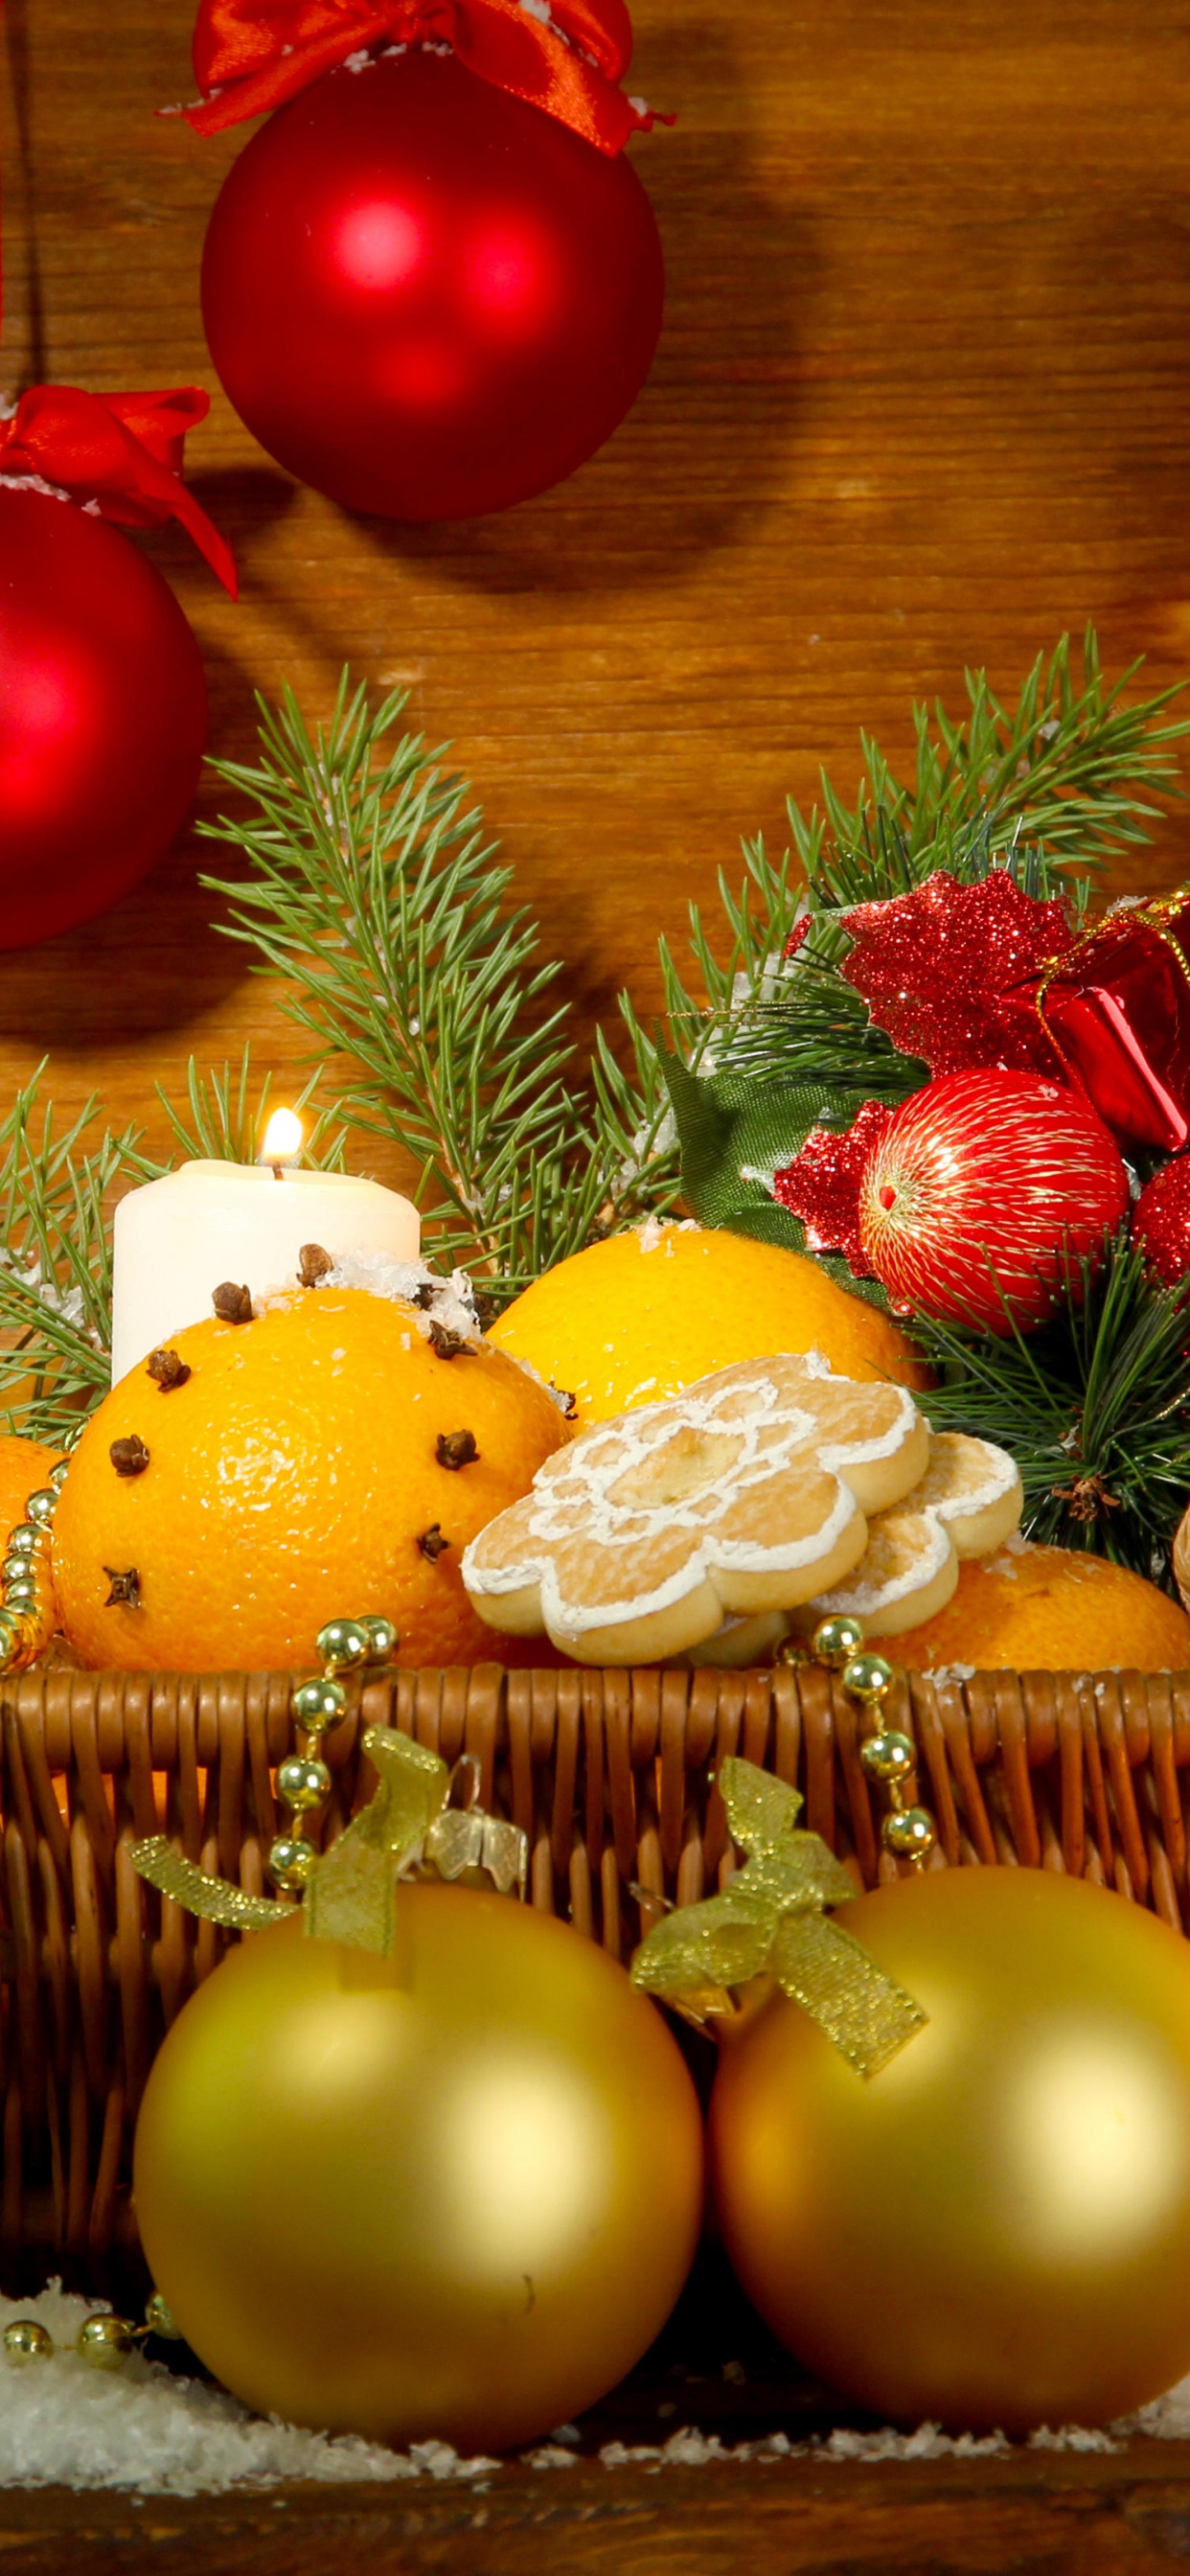 New Year, Christmas Day, Christmas Ornament, Christmas Decoration, Still Life. Wallpaper in 1242x2688 Resolution